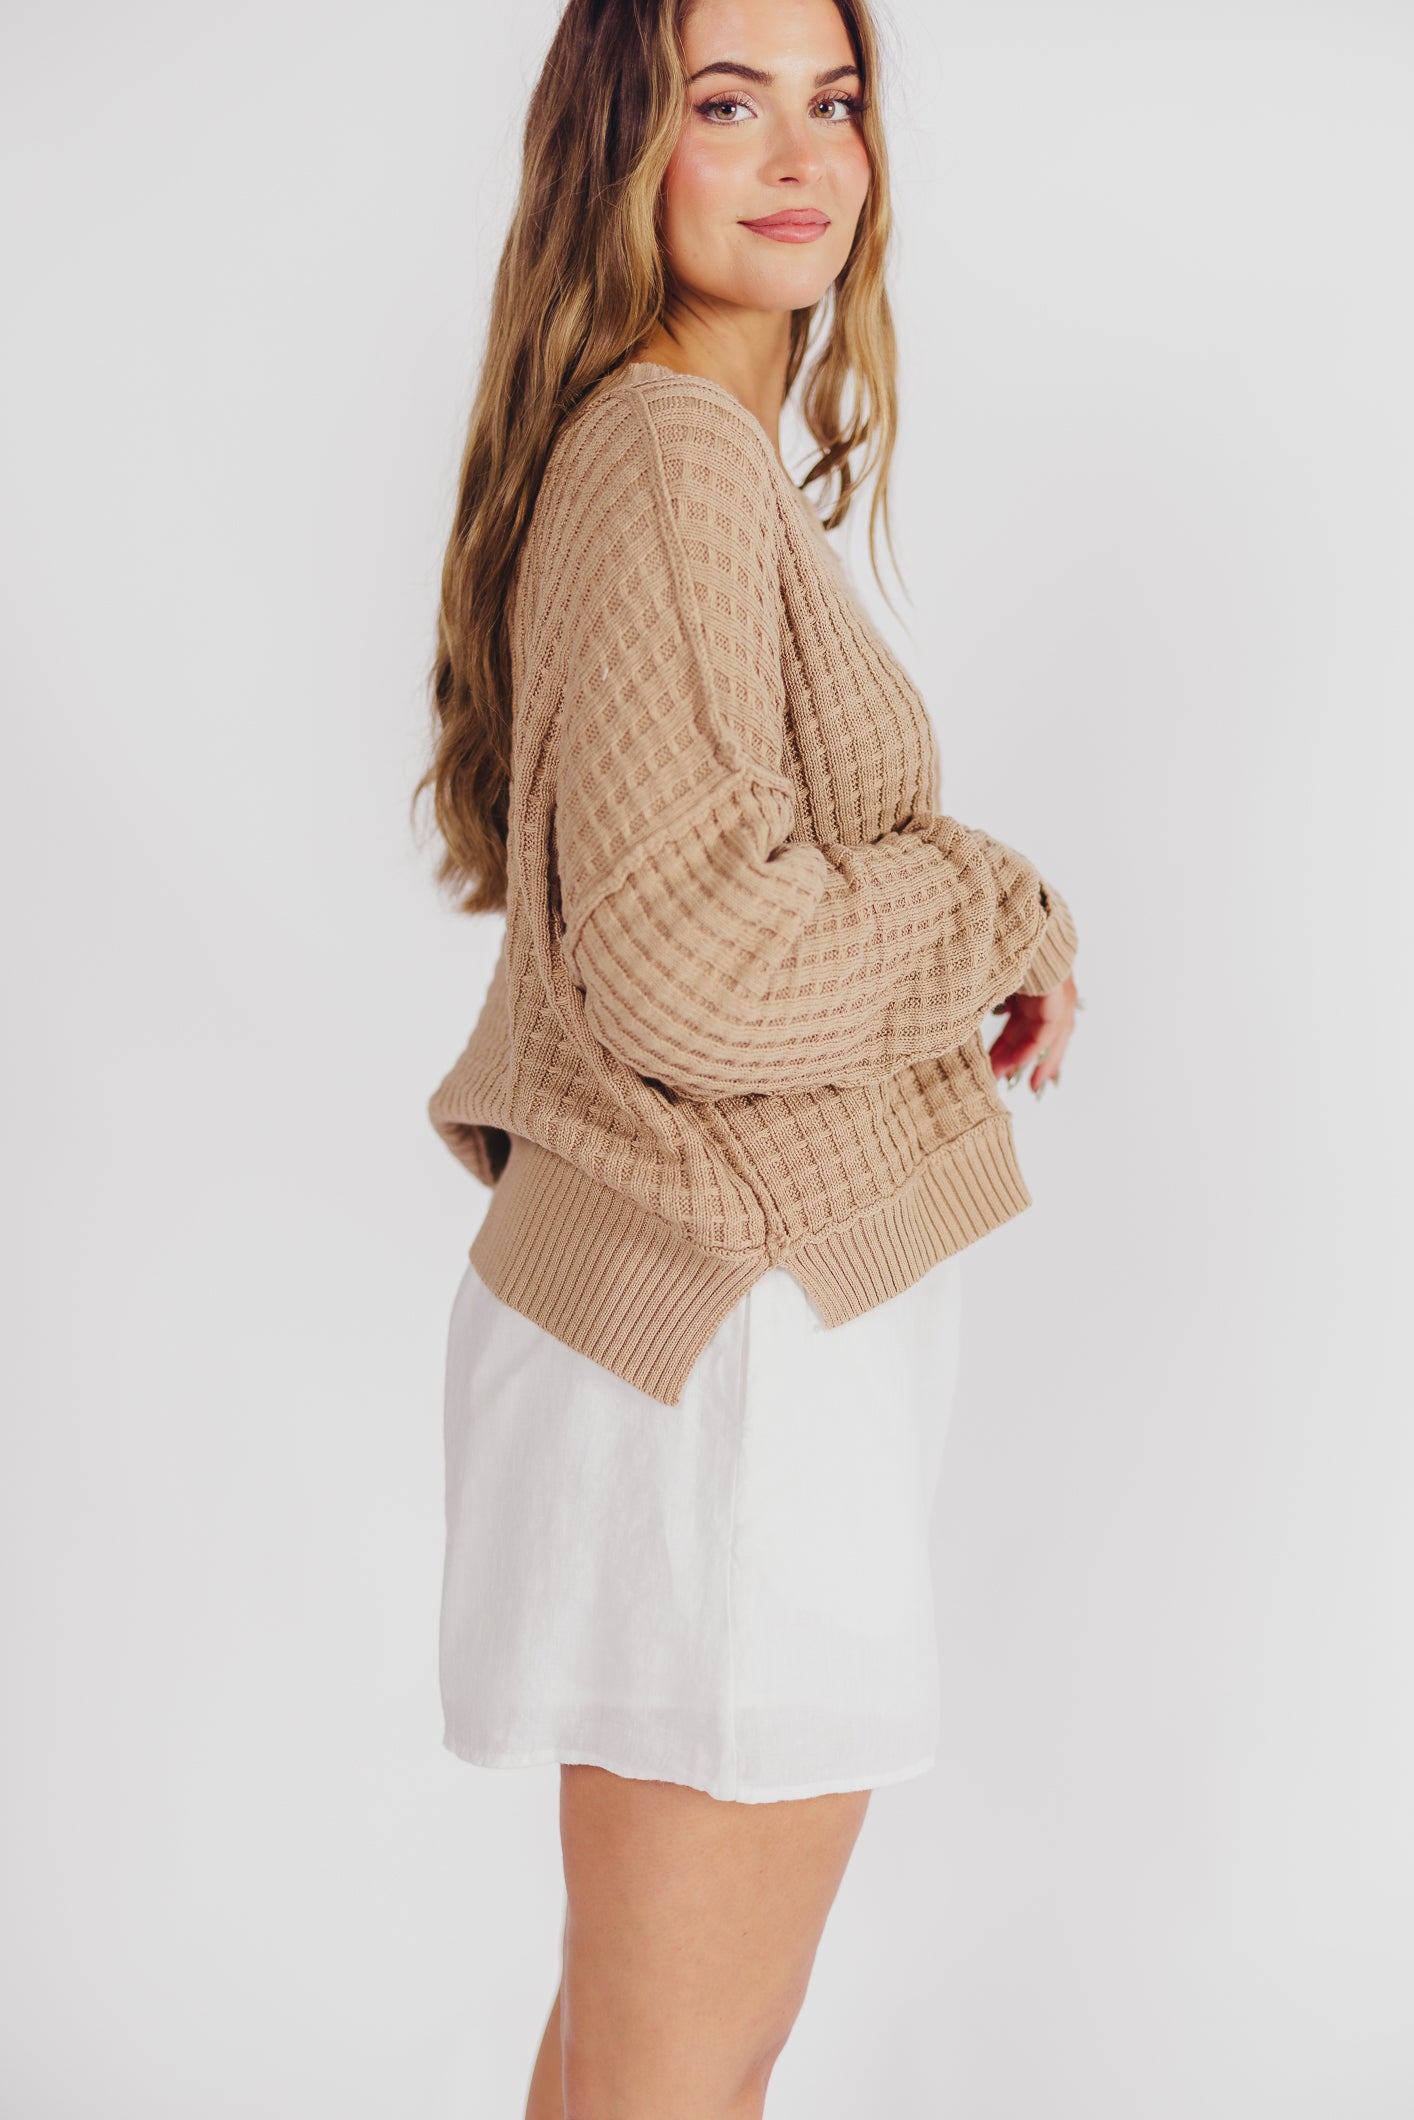 Baylor Pullover in Taupe